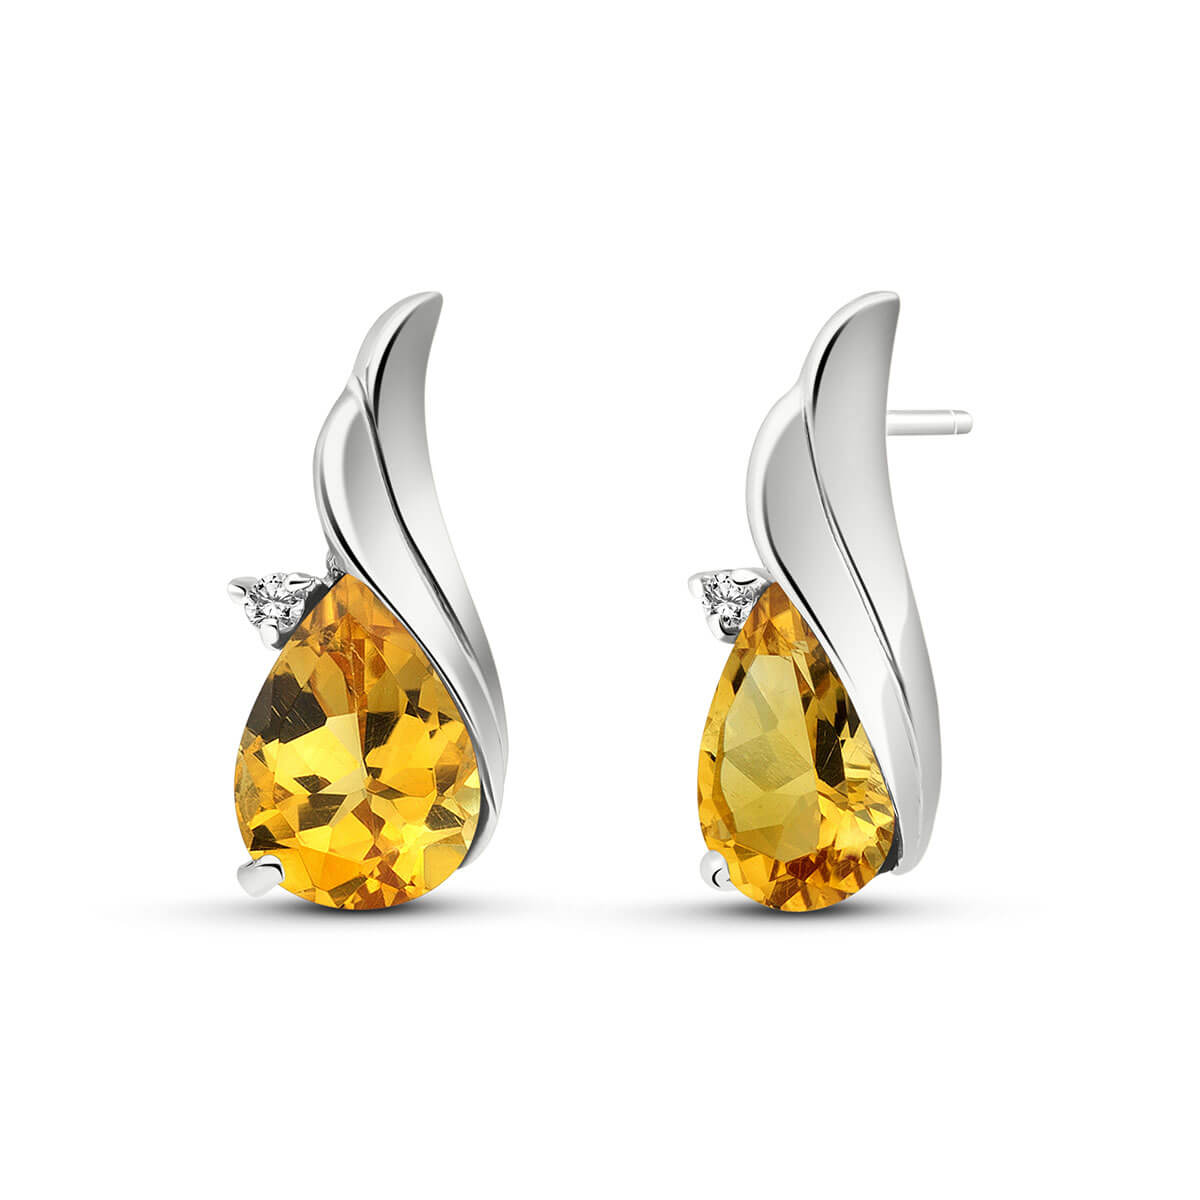 Citrine Stud Earrings 3.26 ctw in 9ct White Gold